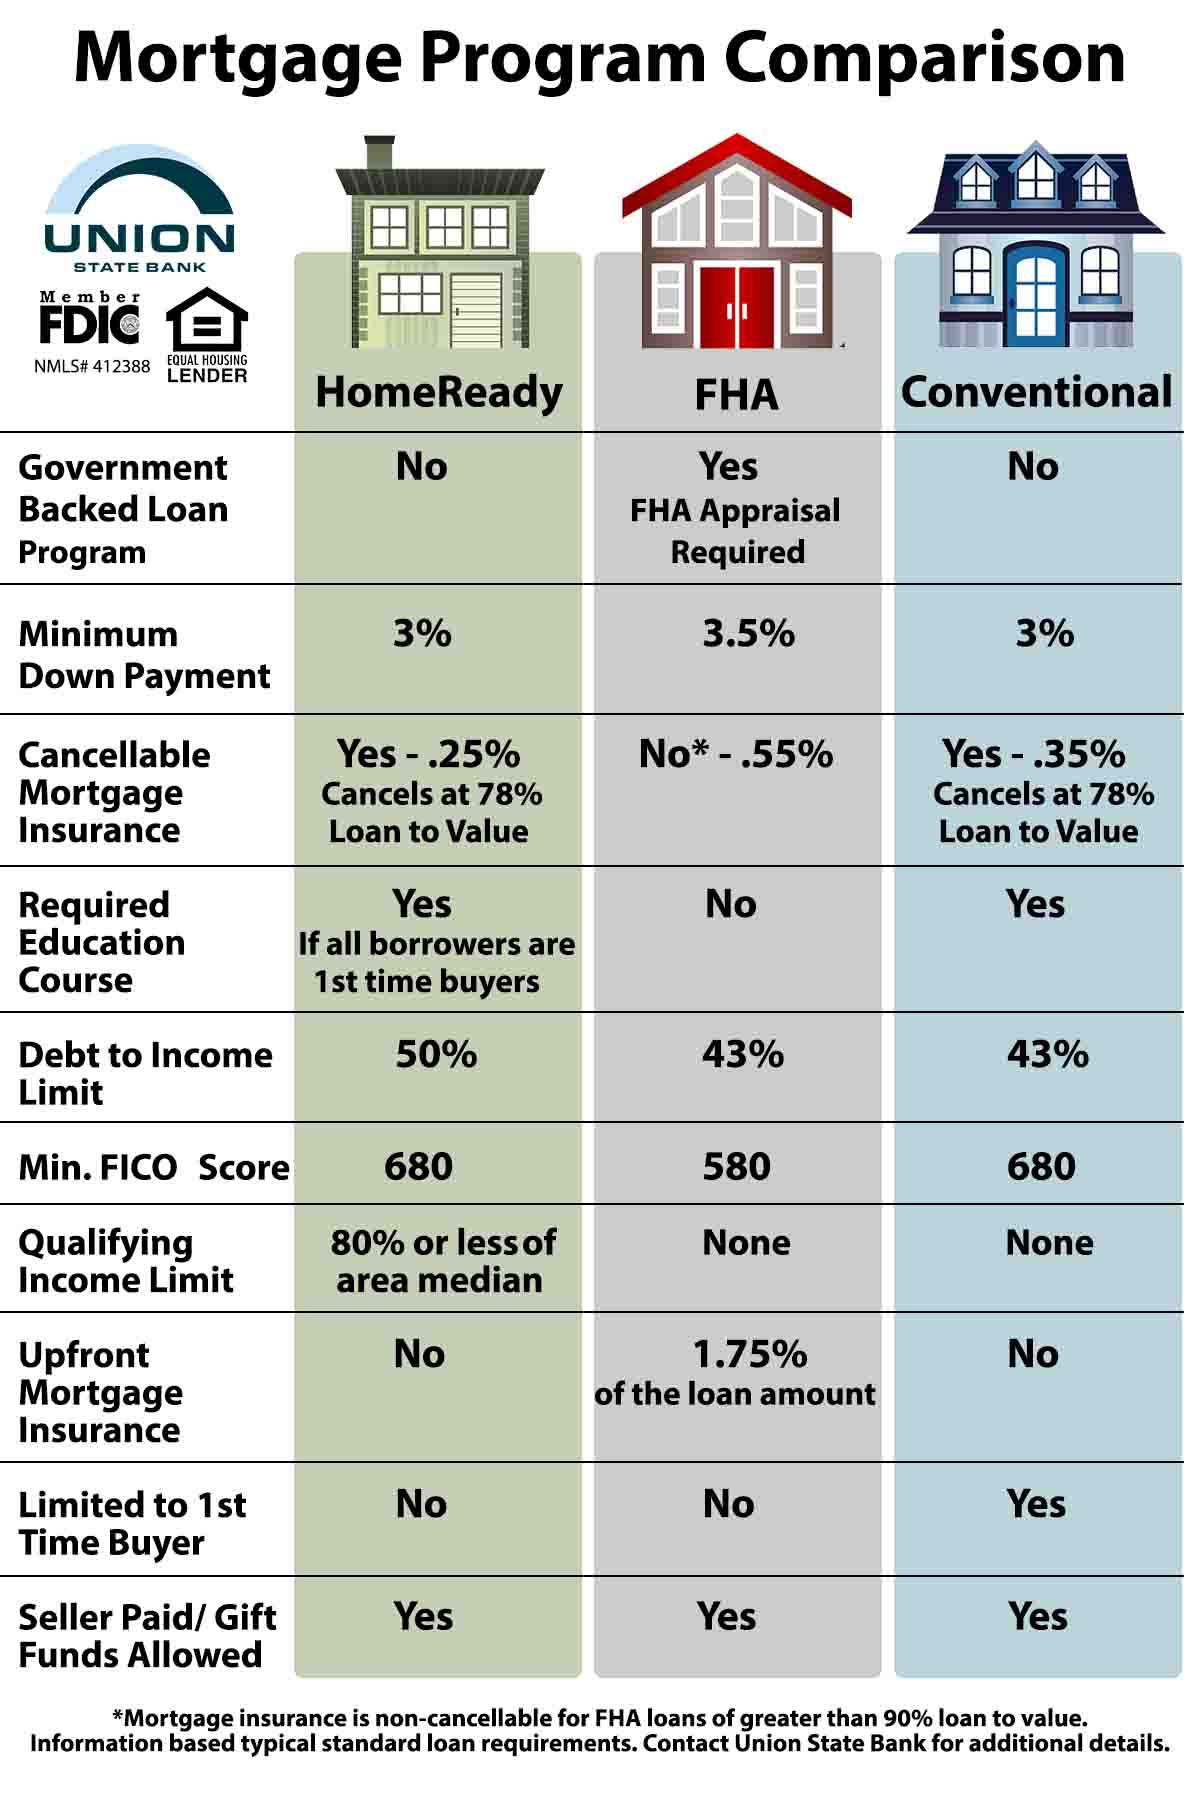 Mortgage Program Comparison between Home Ready, FHA and conventional mortgage products.

Accessibility Statement for Image

Union State Bank is committed to ensuring digital accessibility for people with disabilities. We are continually improving the user experience for everyone, and applying the relevant accessibility standards.

The Web Content Accessibility Guidelines (WCAG) defines requirements for designers and developers to improve accessibility for people with disabilities. It defines three levels of conformance: Level A, Level AA, and level AAA. Union State Bank is partially conformant with WCAG2.0 level AA. Partially conformant means that some parts of the content do not fully conform to the accessibility standard. Such as the image on this page, which may not be accessible through online readers.

For accessibility assistance with this document or to provide feedback on the accessibility of the Union State Bank website contact us:
·         Phone: 866-557-0060
·         E-mail: customercare@myunionstate.bank
·         Postal address: PO Box 928, Arkansas City KS 67005